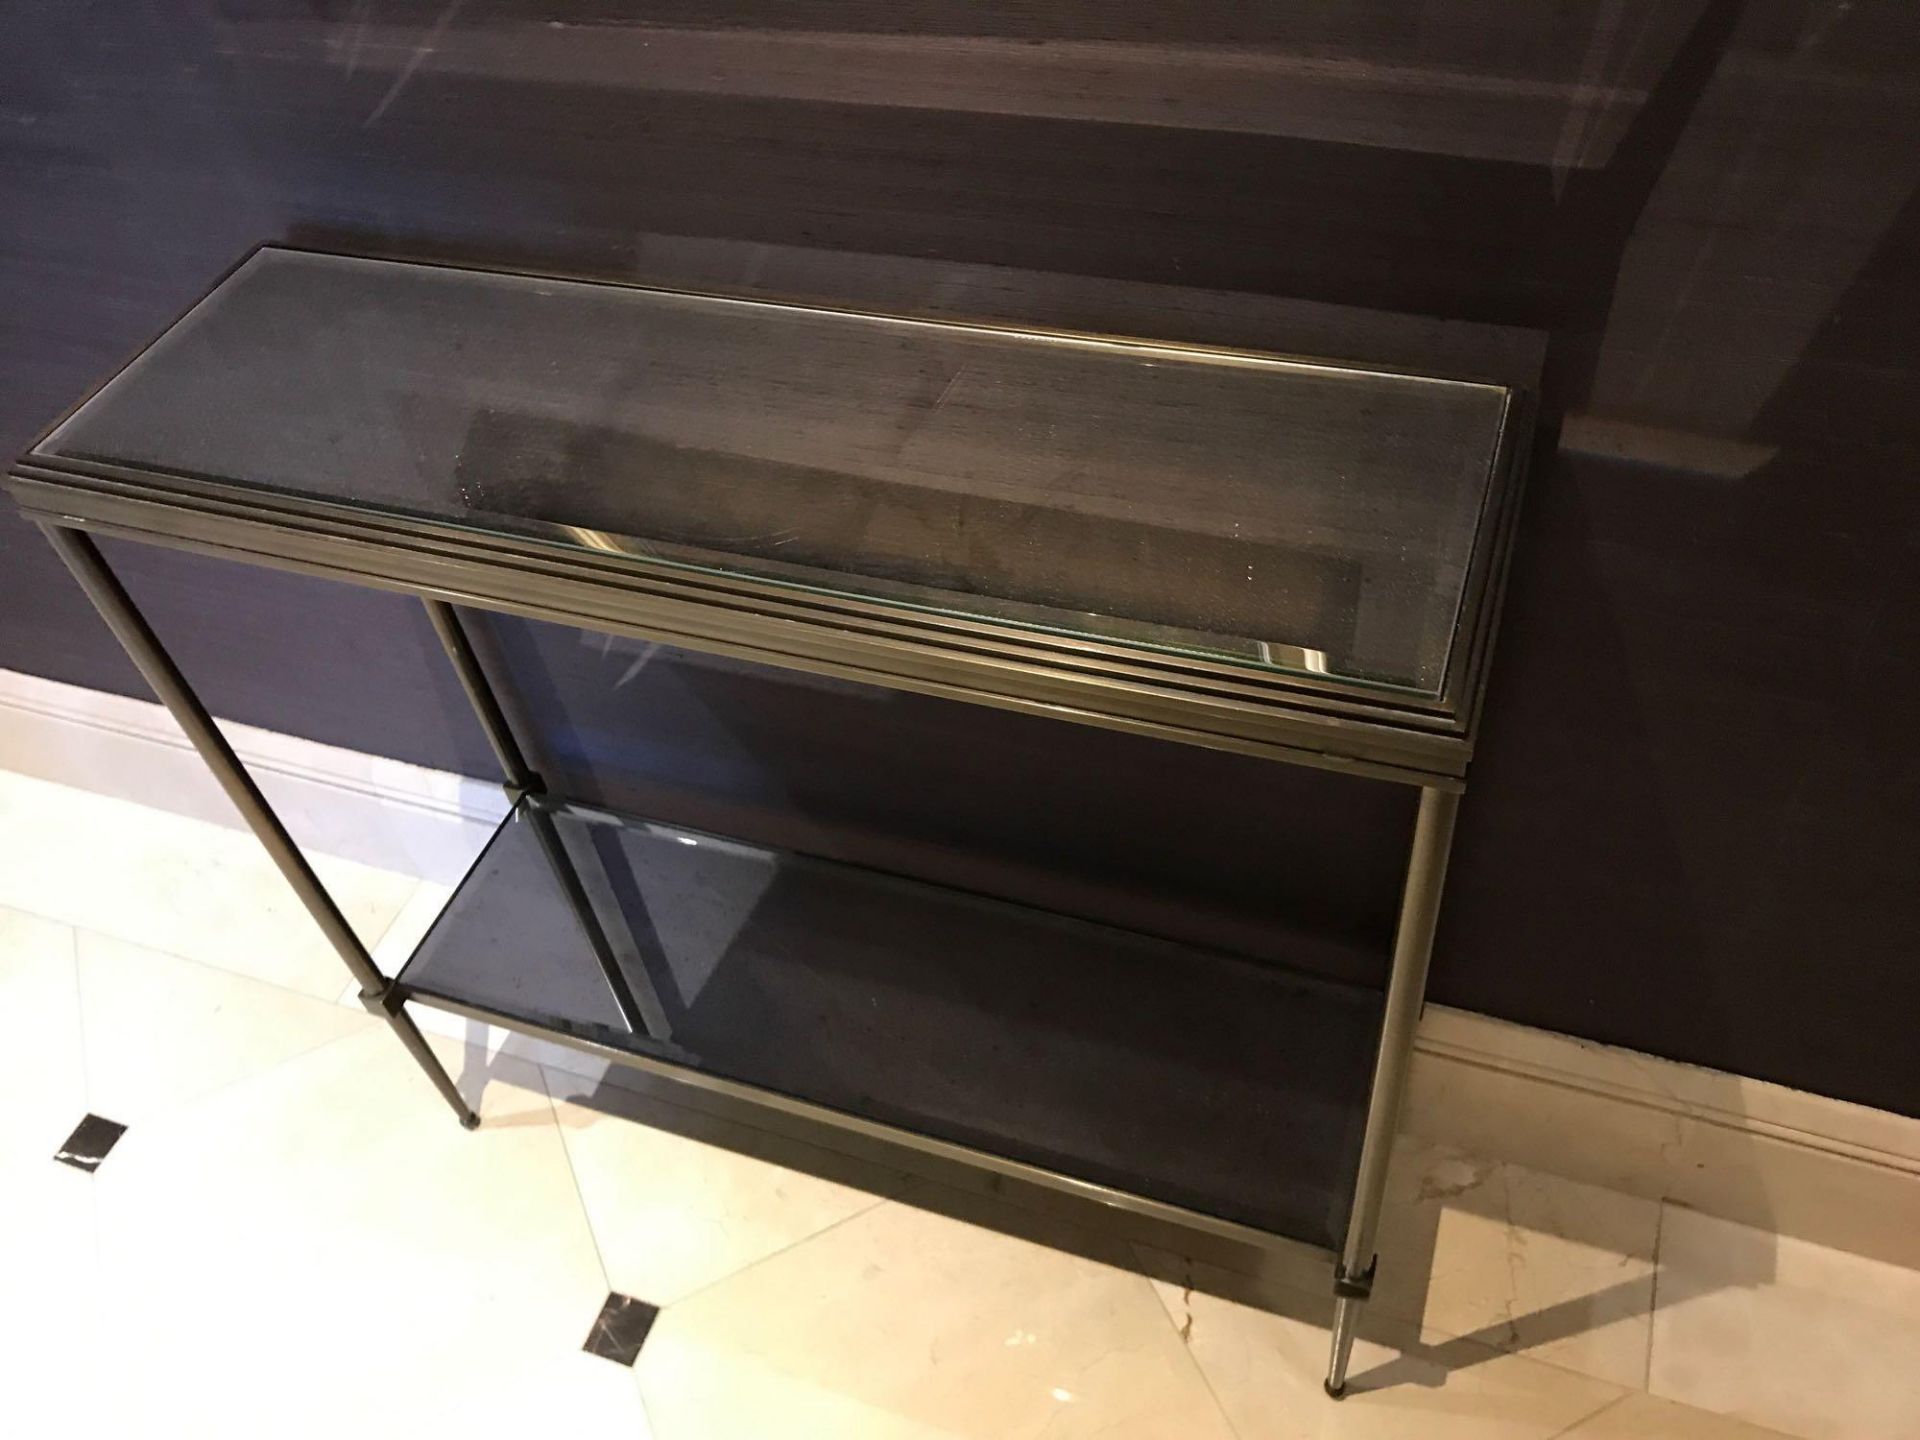 A Forged Metal Two Tier Console Table With Glass Shelves 88 x 24 x 74cm (Room 440)